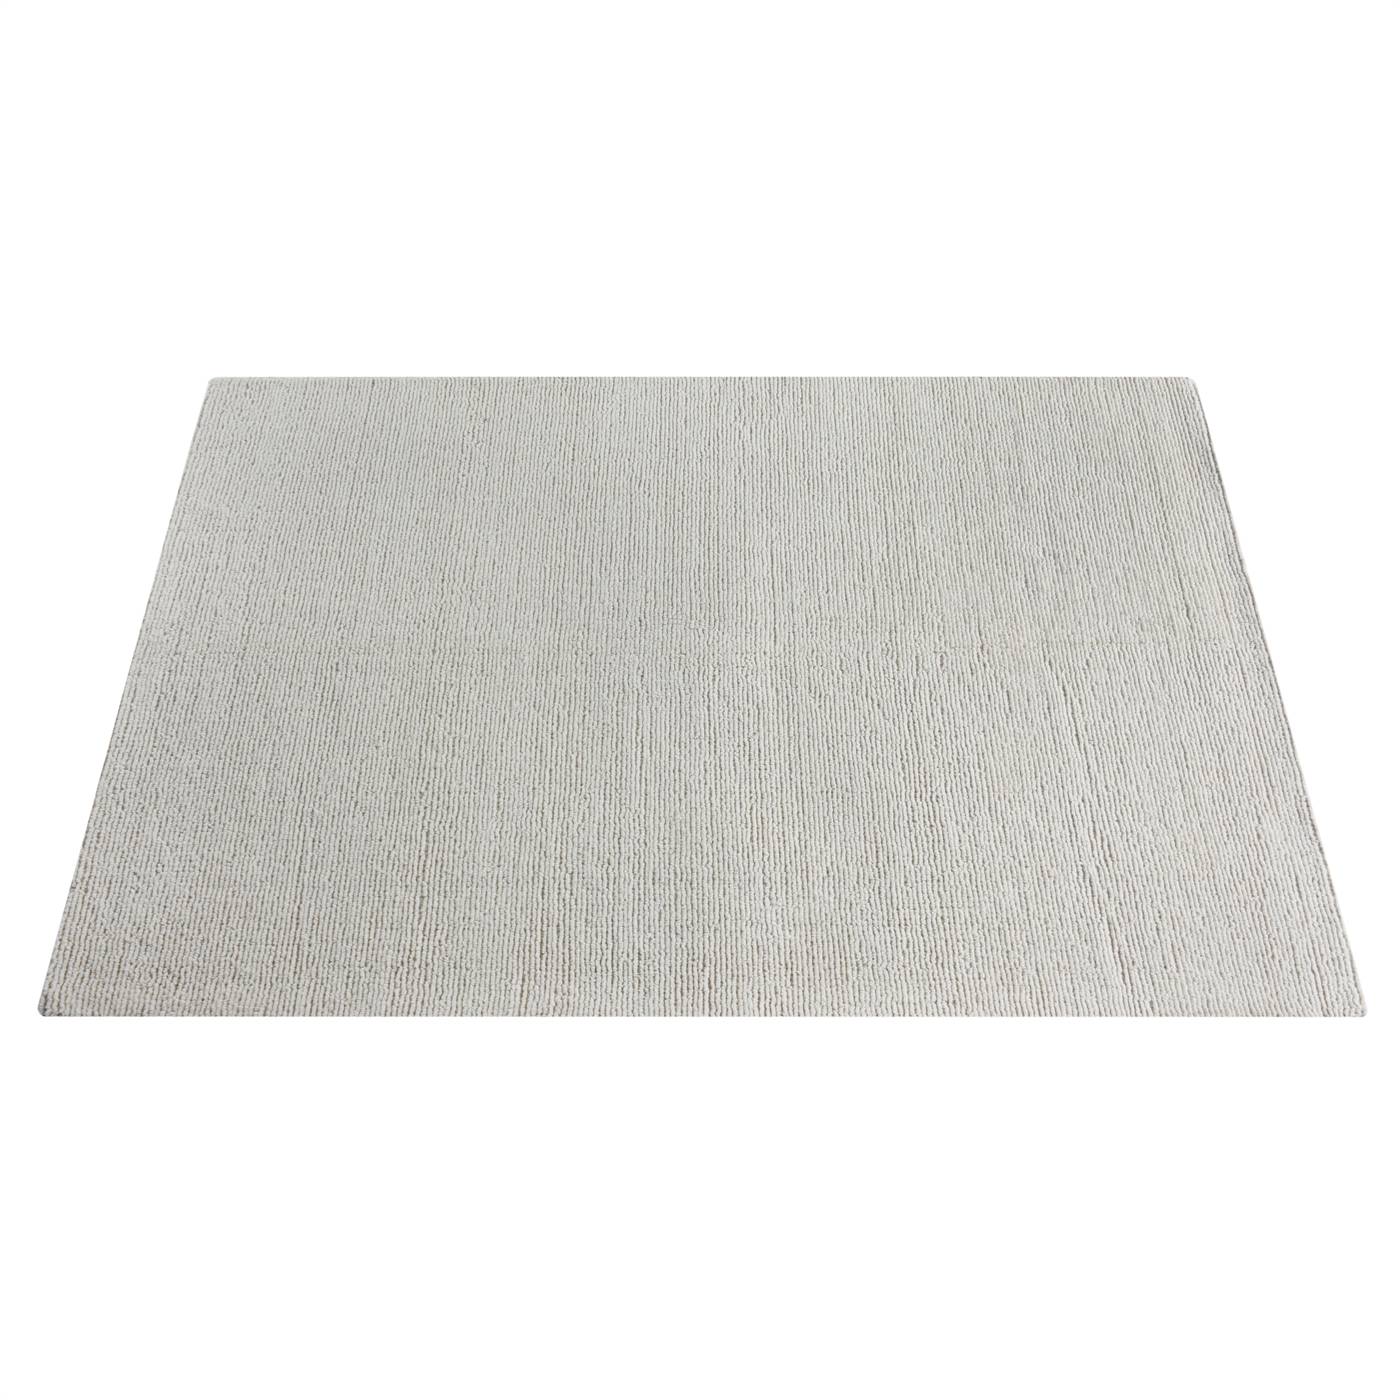 Area Rug, Bedroom Rug, Living Room Rug, Living Area Rug, Indian Rug, Office Carpet, Office Rug, Shop Rug Online, Natural White, Wool, Hand Woven, Over Tufted, Handwoven, All Loop, Texture 